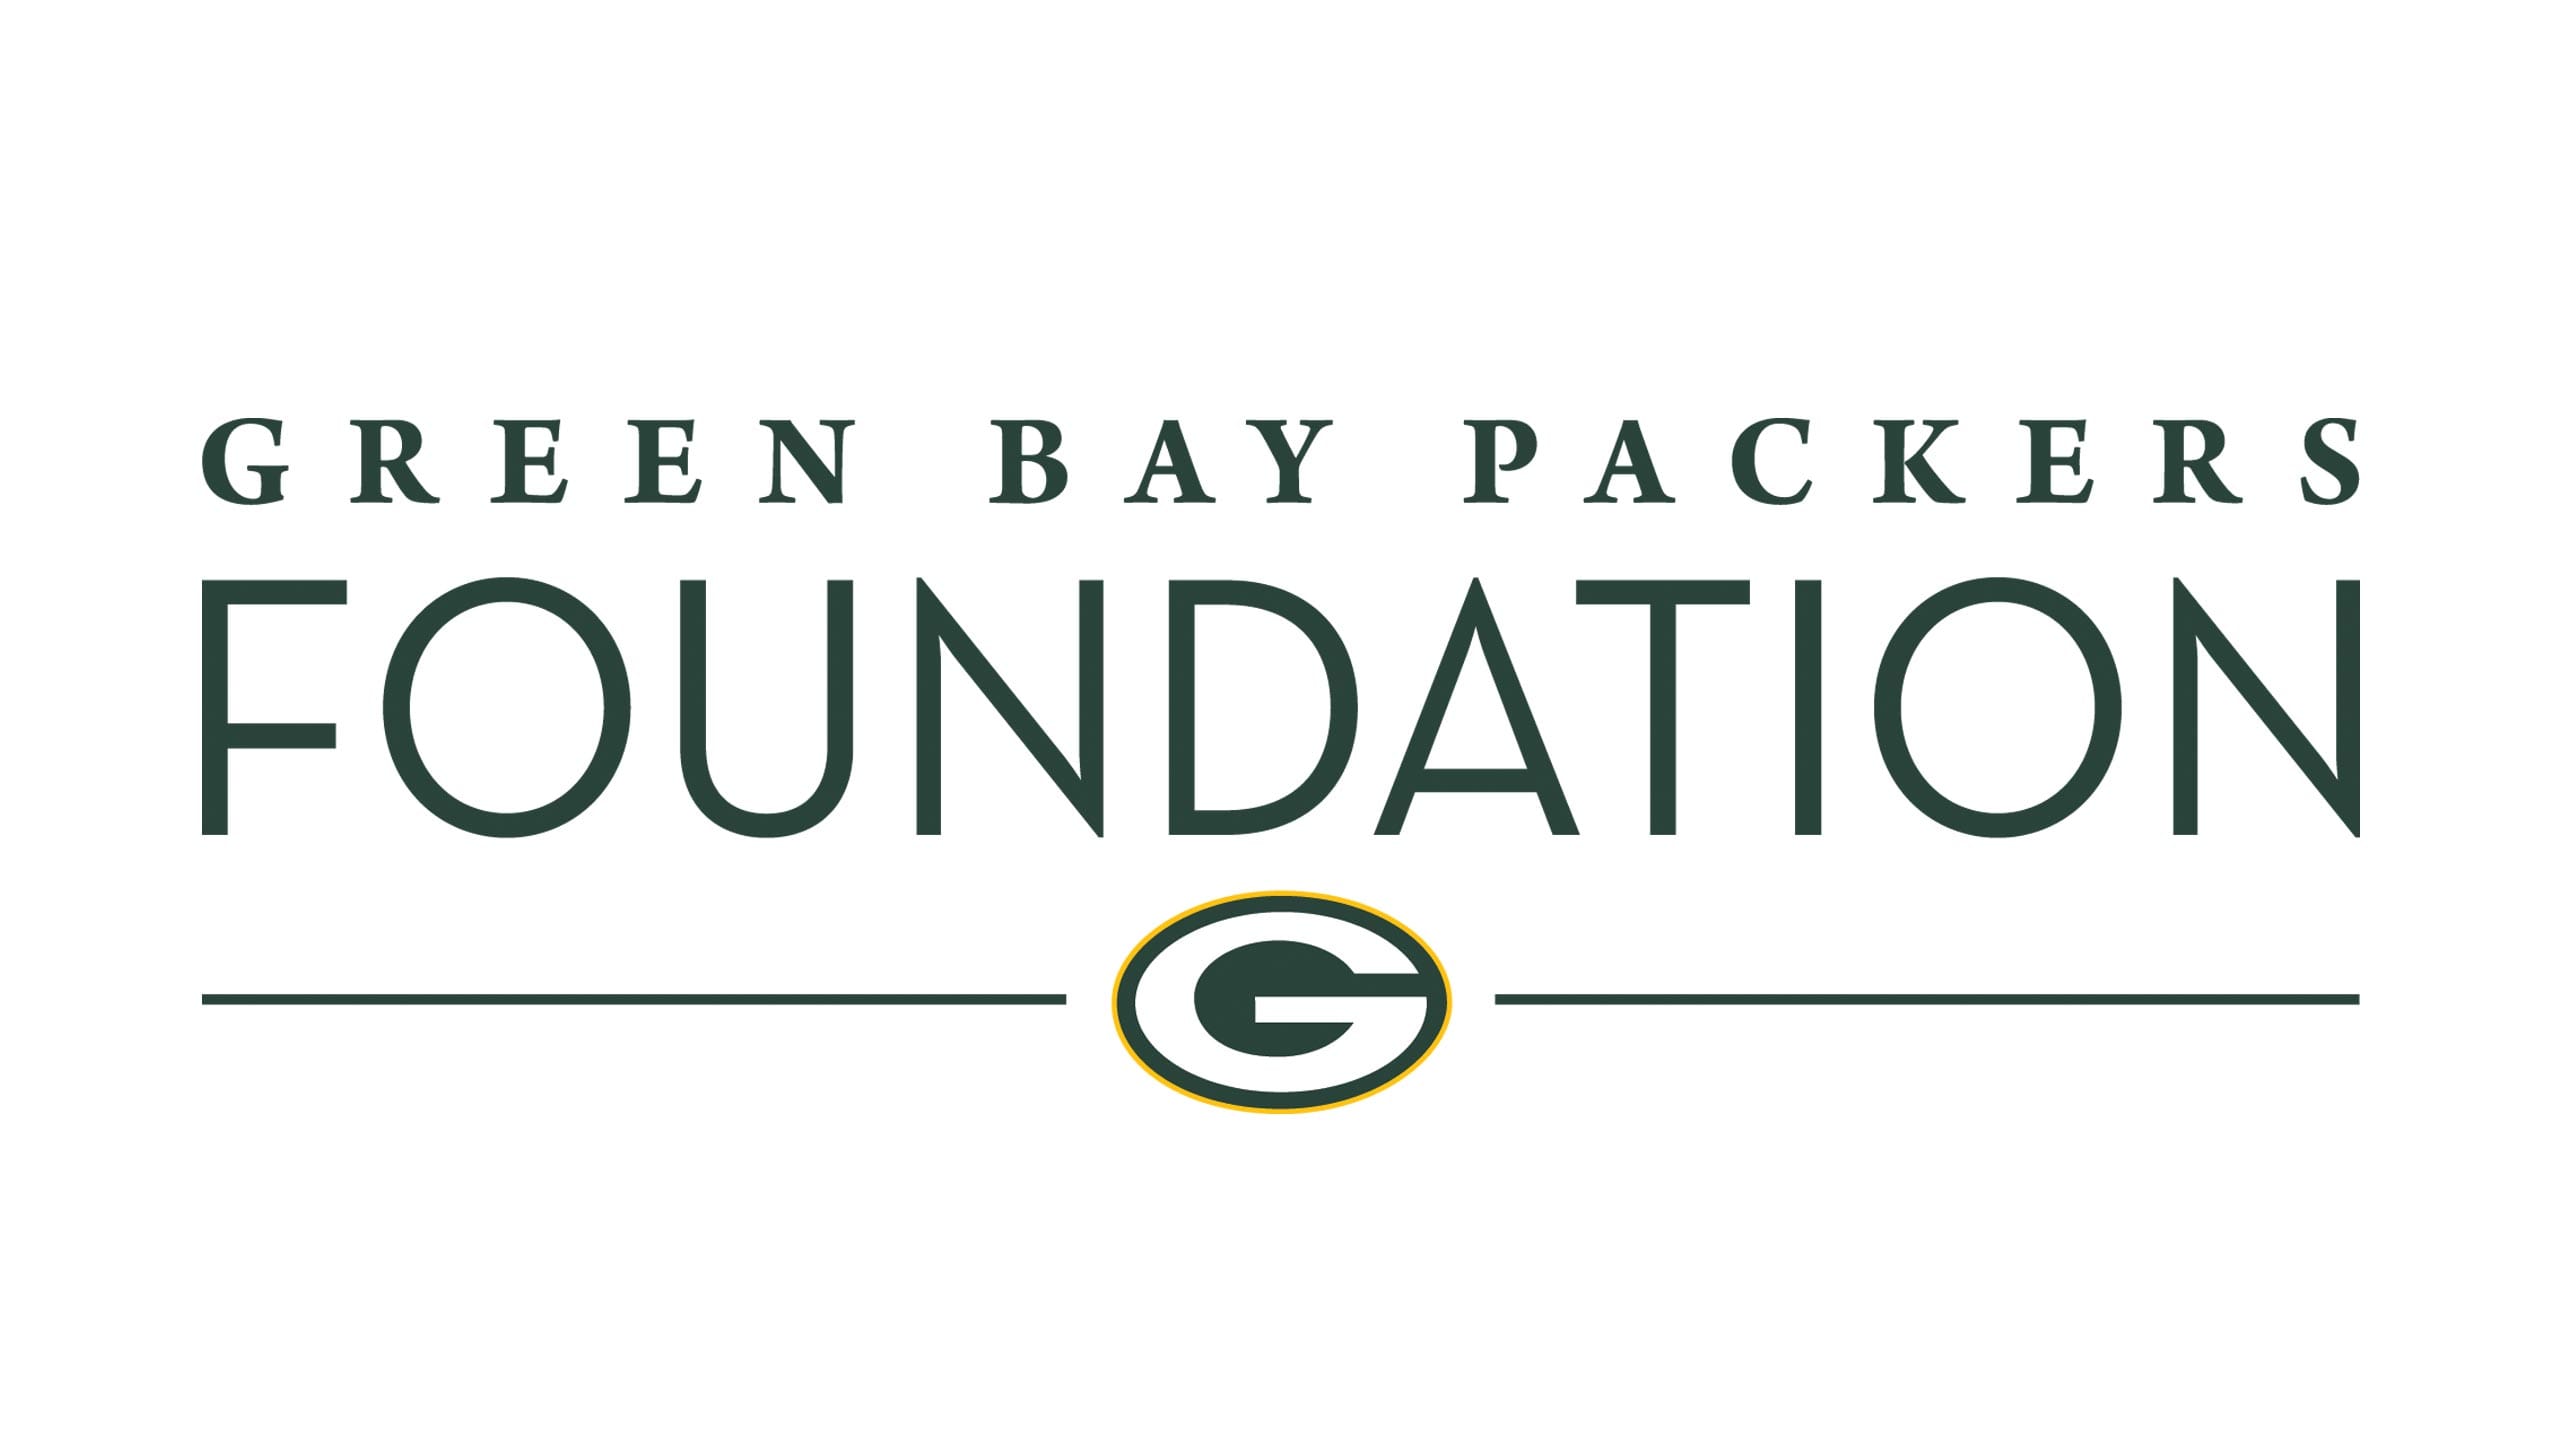 Green Bay Packers Foundation logo